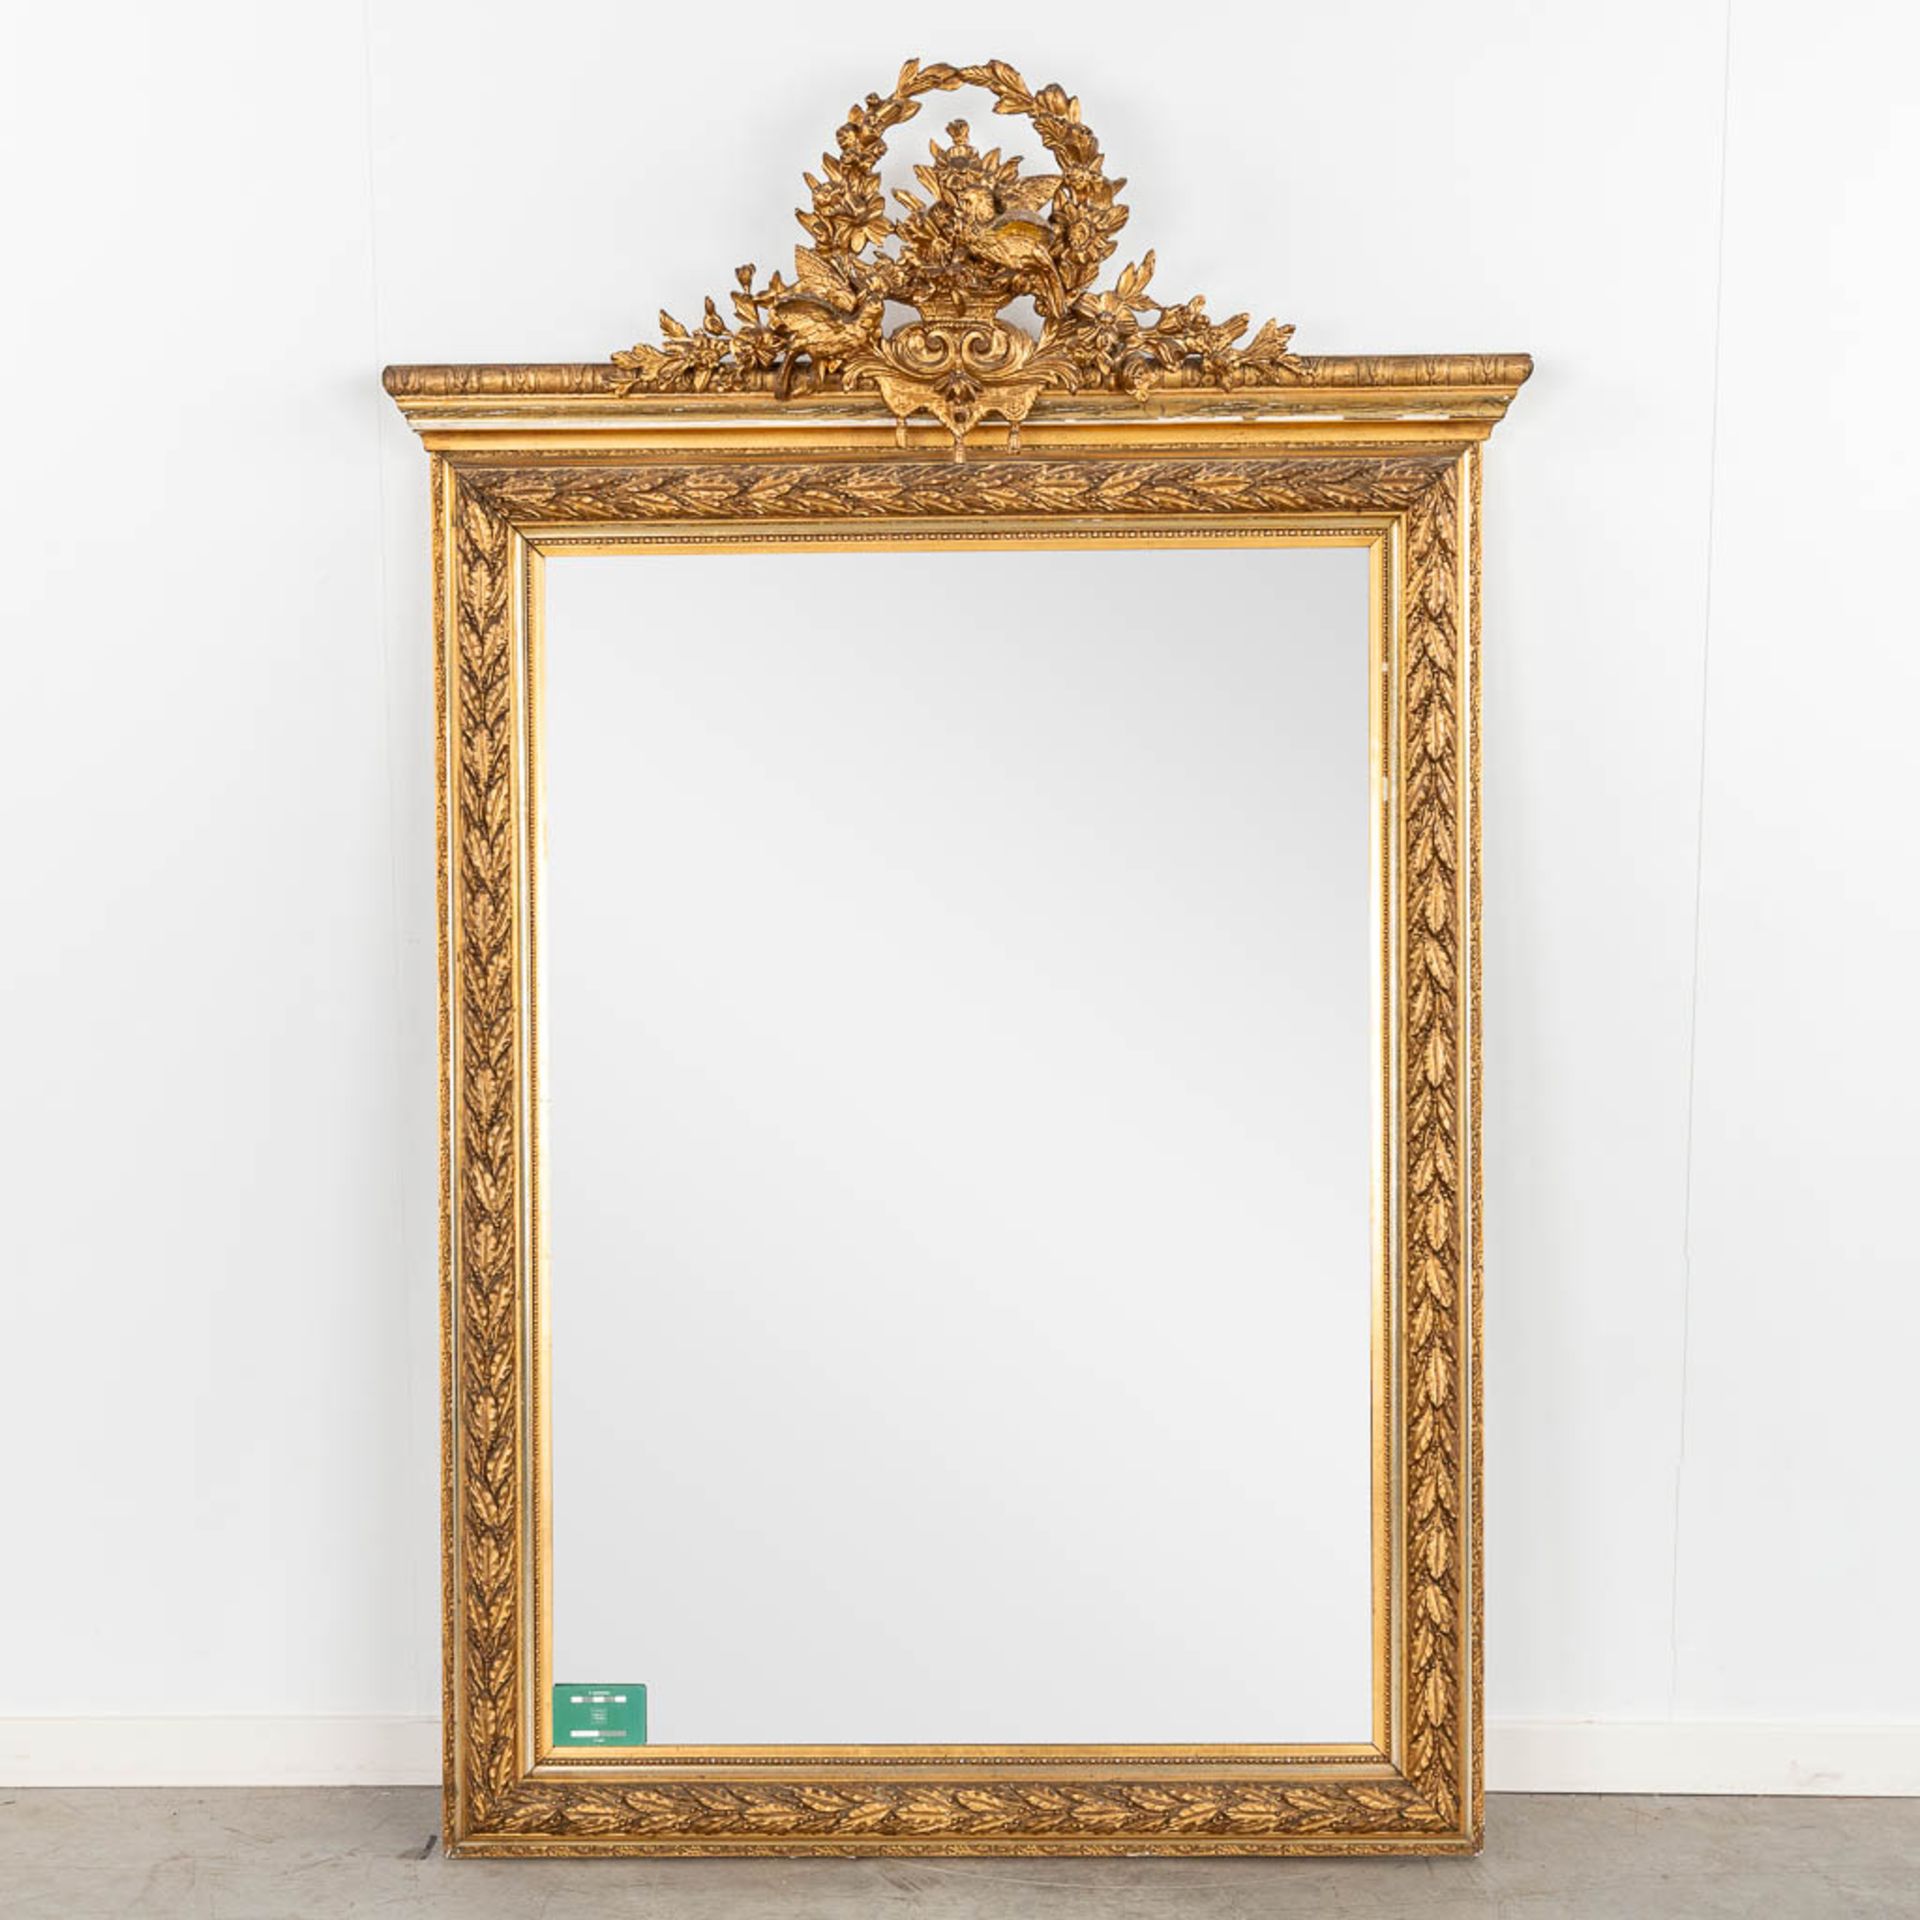 An antique mirror decorated with 'Lovebirds', circa 1900. (W:103 x H:162 cm) - Image 2 of 13